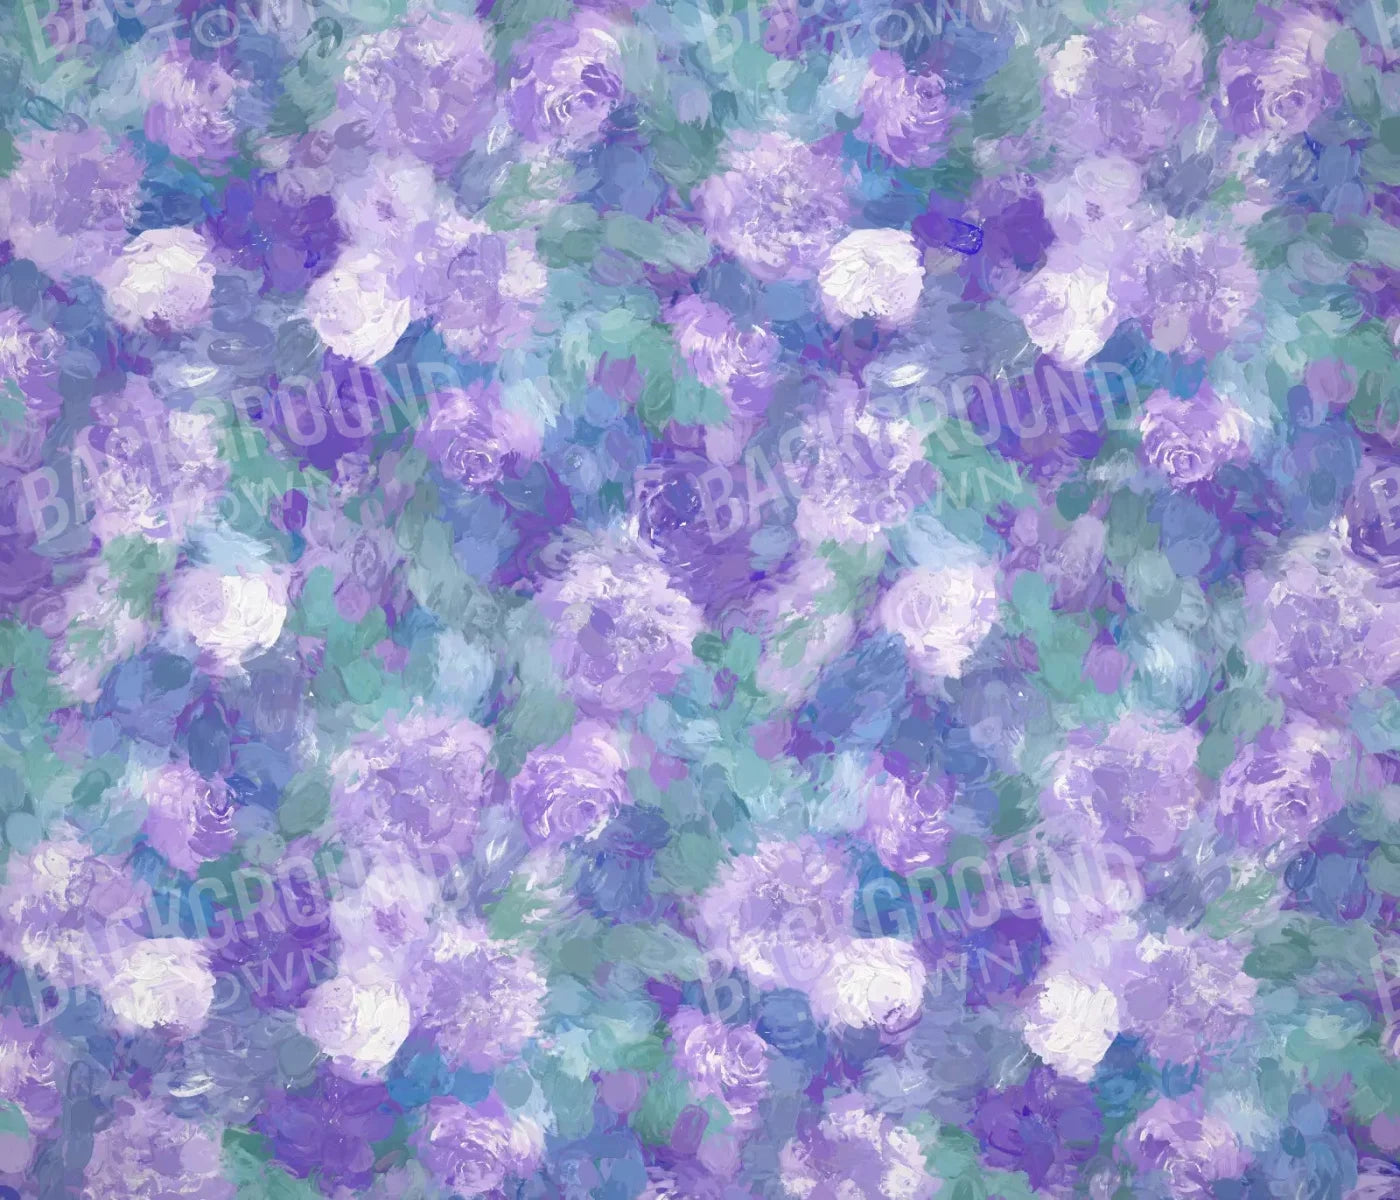 Lilac Lullaby 12X10 Ultracloth ( 144 X 120 Inch ) Backdrop